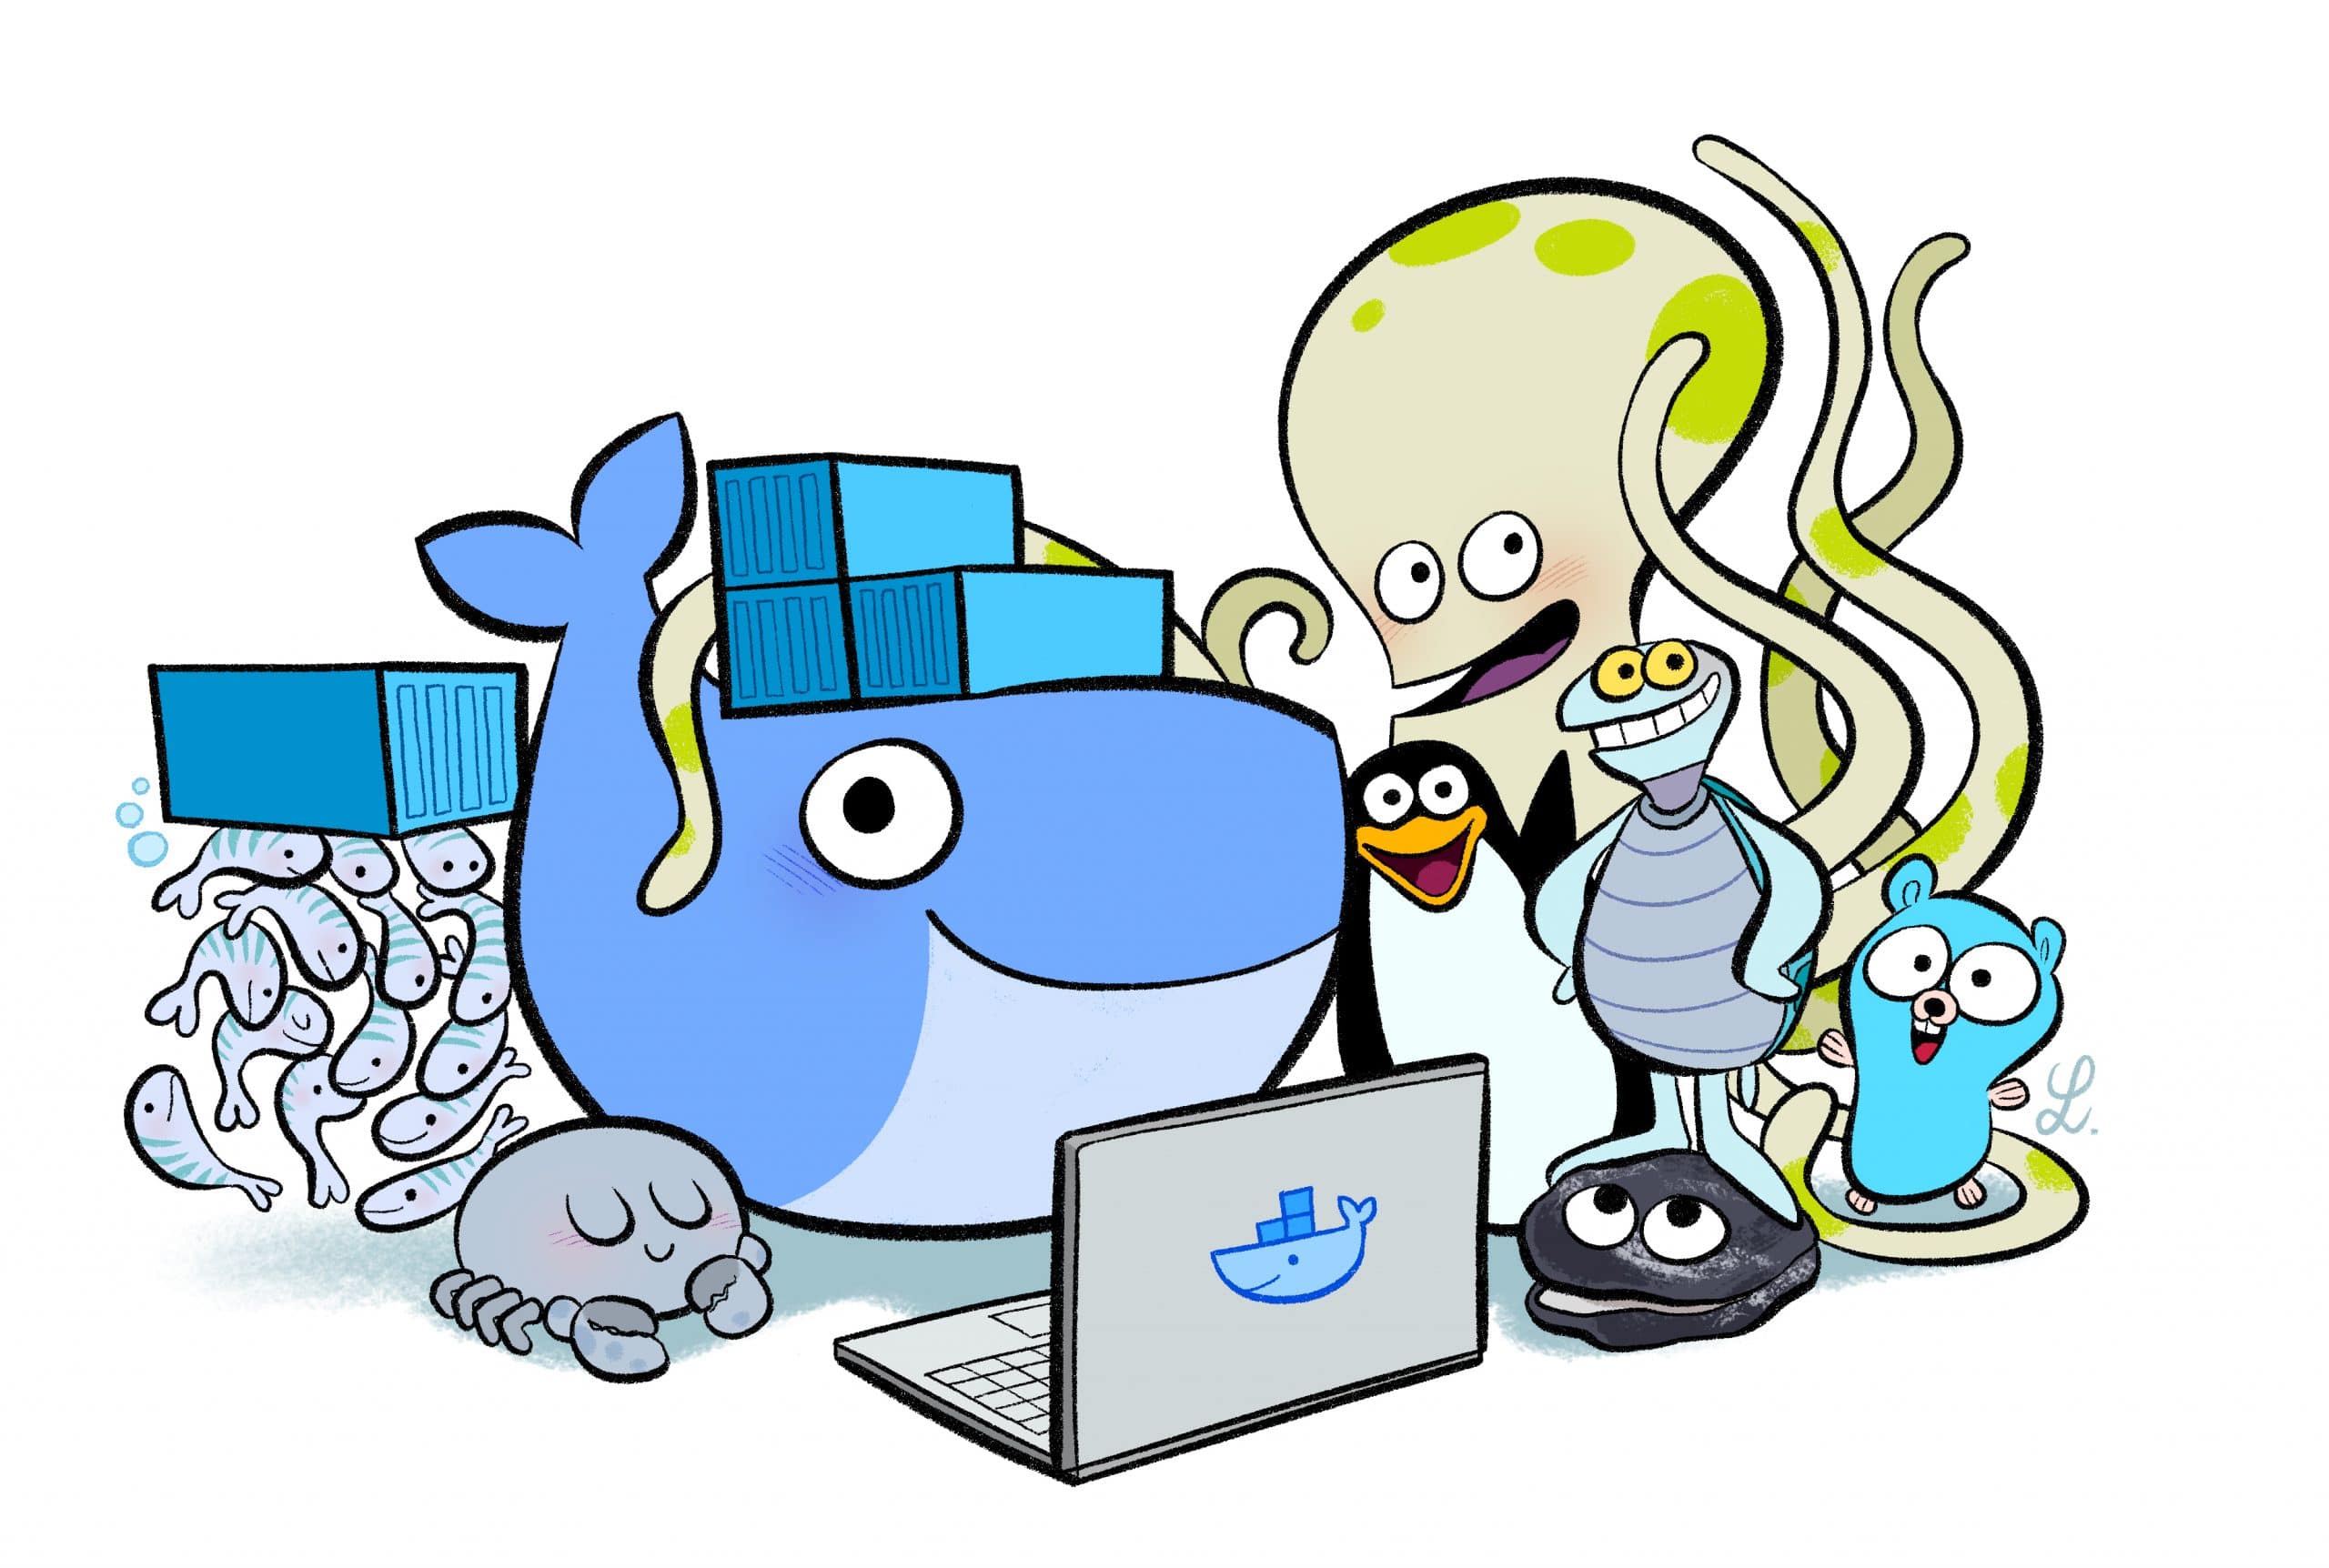 Moby the Docker whale and all his friends